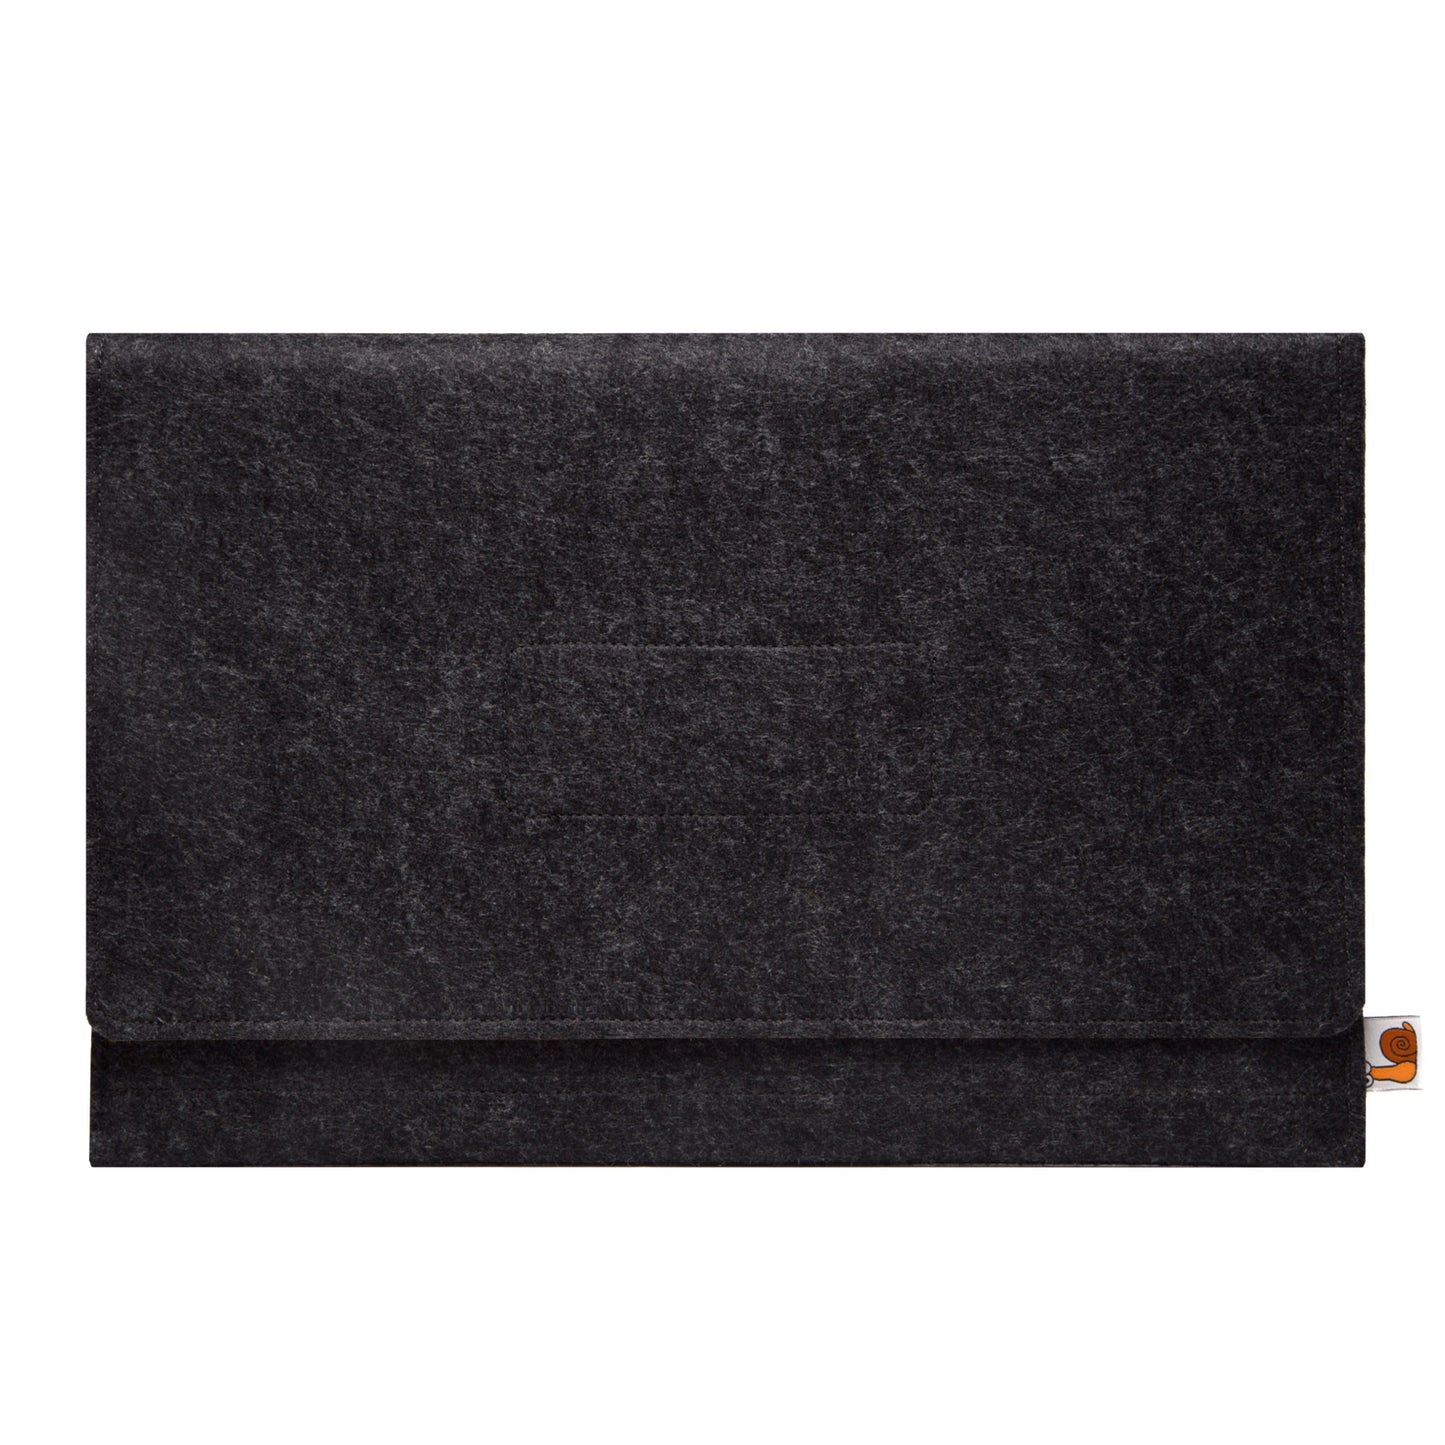 Premium Felt iPad Cover: Ultimate Protection with Accessories Pocket - Charcoal & Black